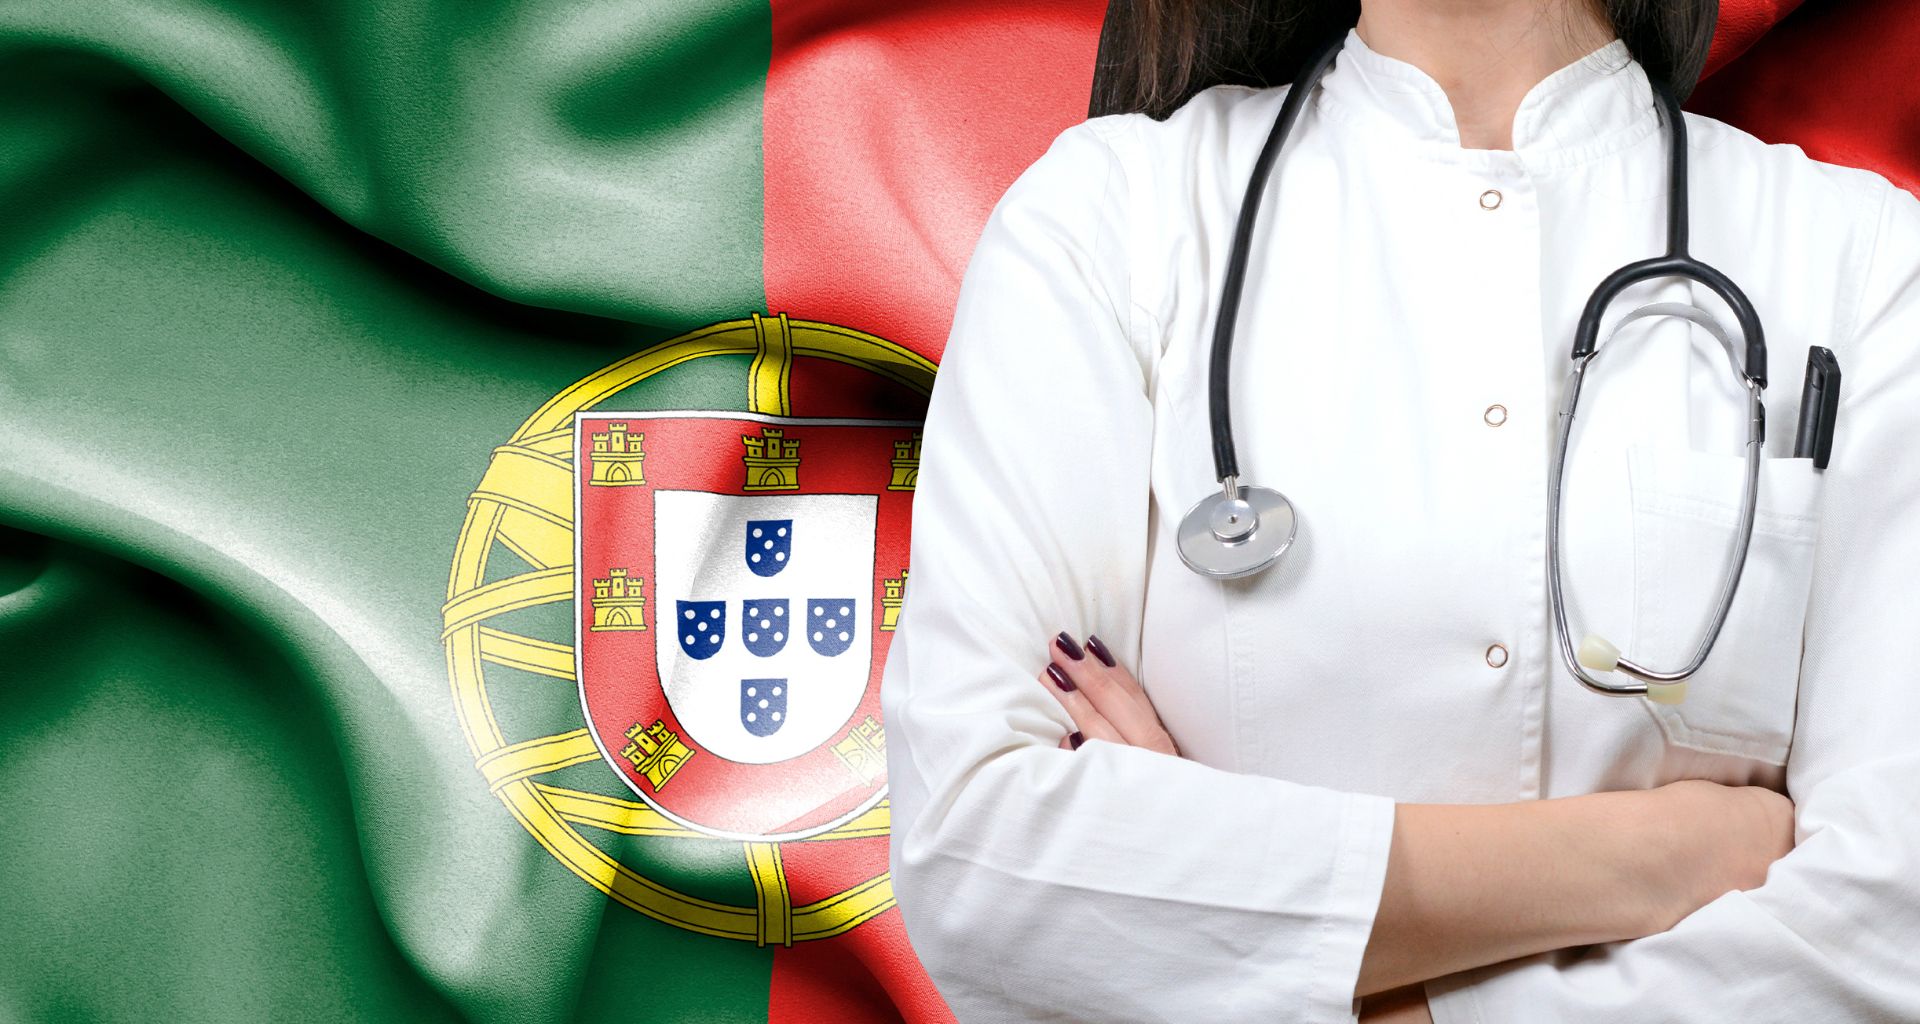 The healthcare system in Portugal